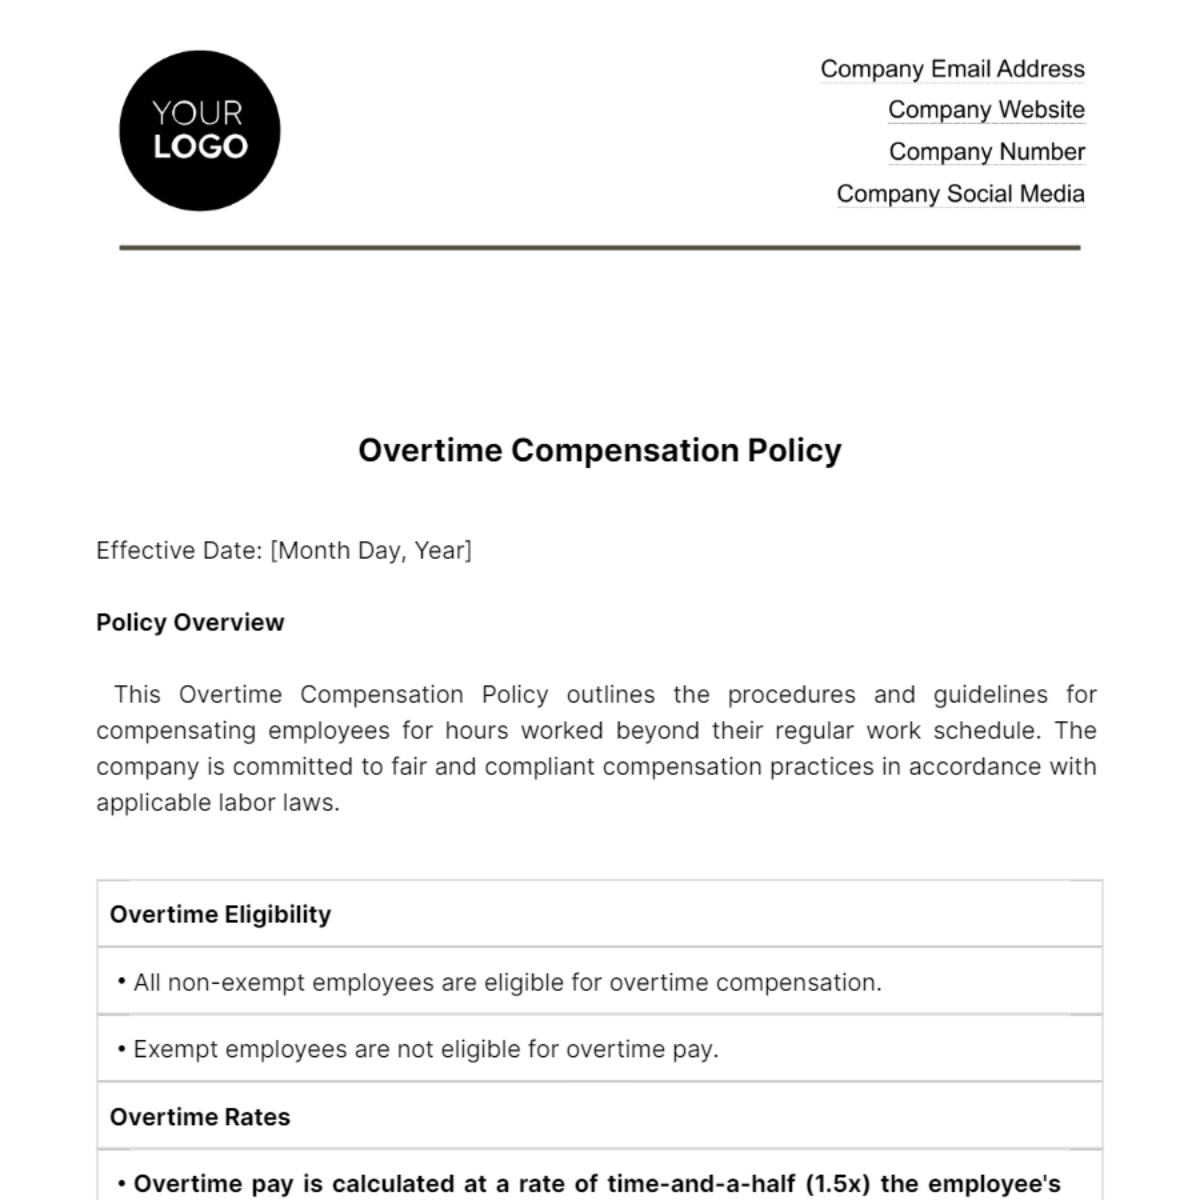 Free Overtime Compensation Policy HR Template